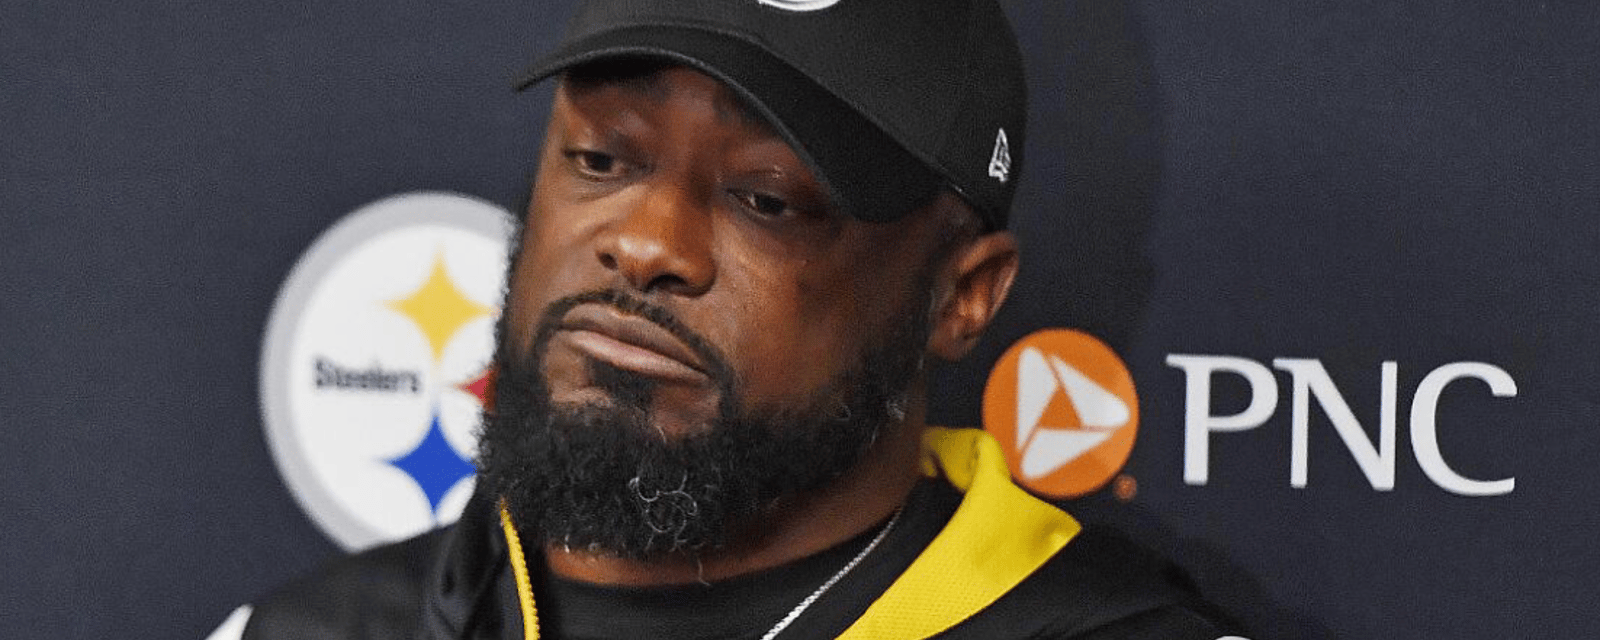 Mike Tomlin hits at “catastrophic” Steelers penalties 